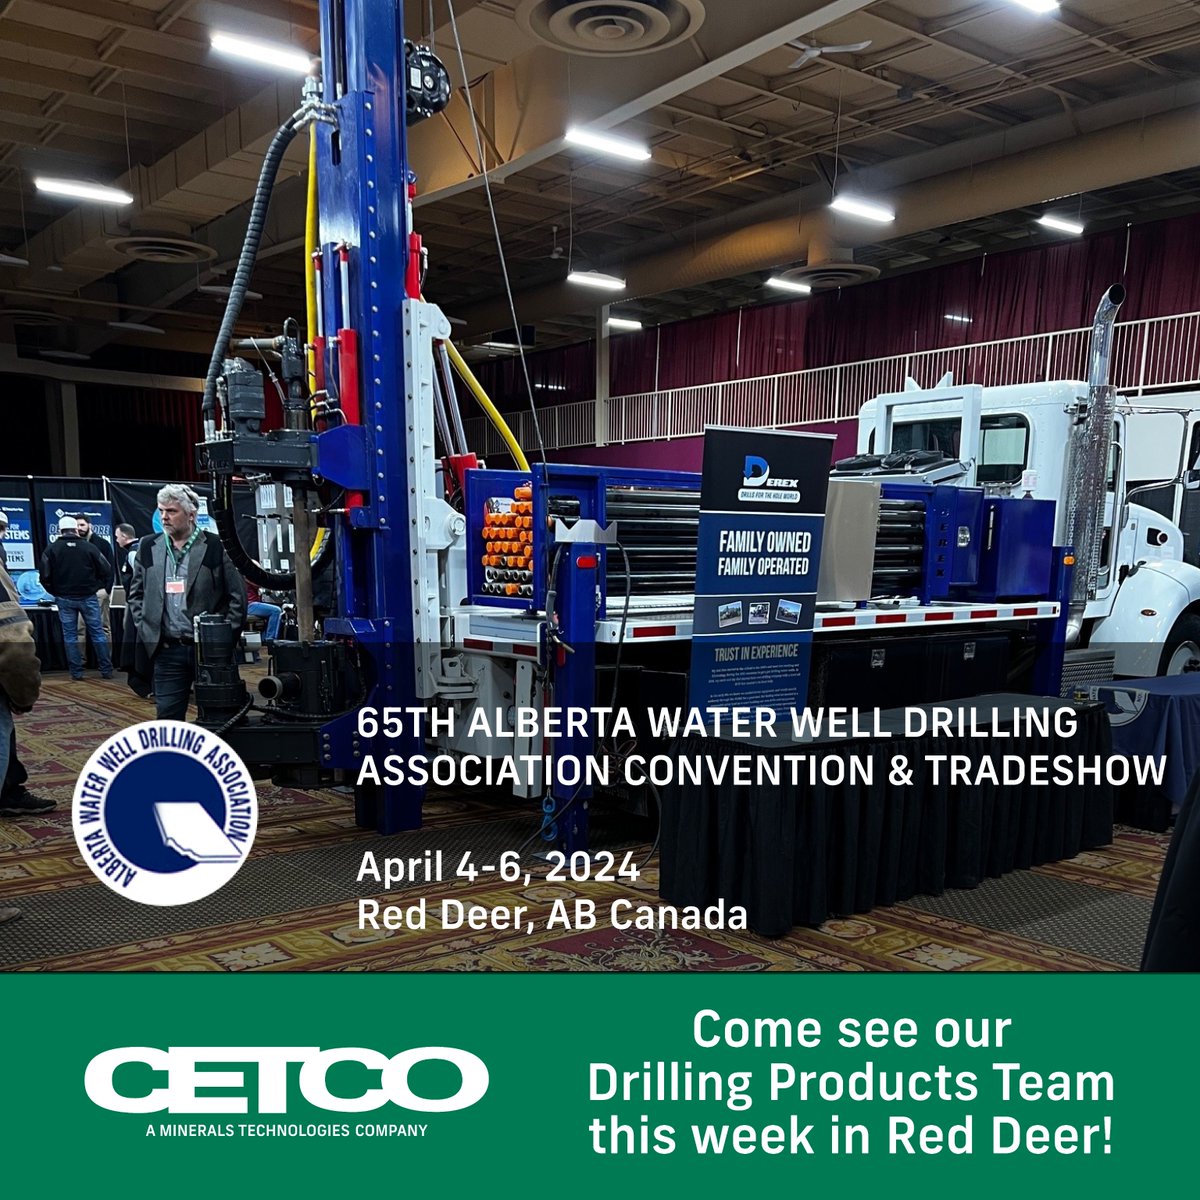 Come see us this week in Red Deer at the 65th Alberta Water Well Drilling Association Convention & Tradeshow!

#CETCO #AWWDA #AlbertaWaterWellDrillingAssociation #WaterWellDrilling